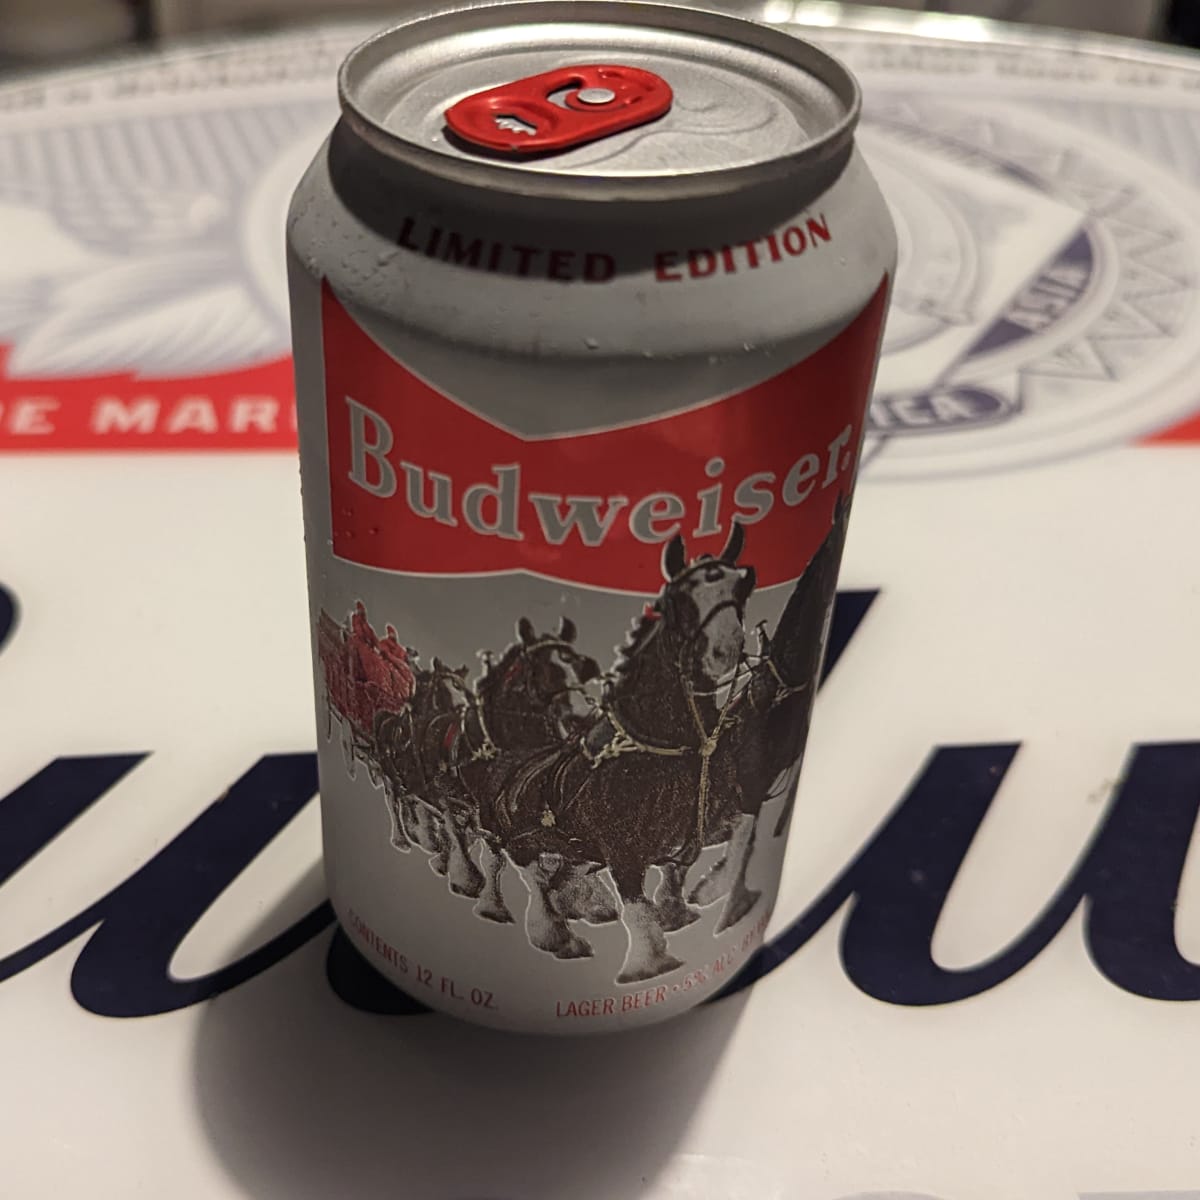 Budweiser to release new limited-edition Cubs cans